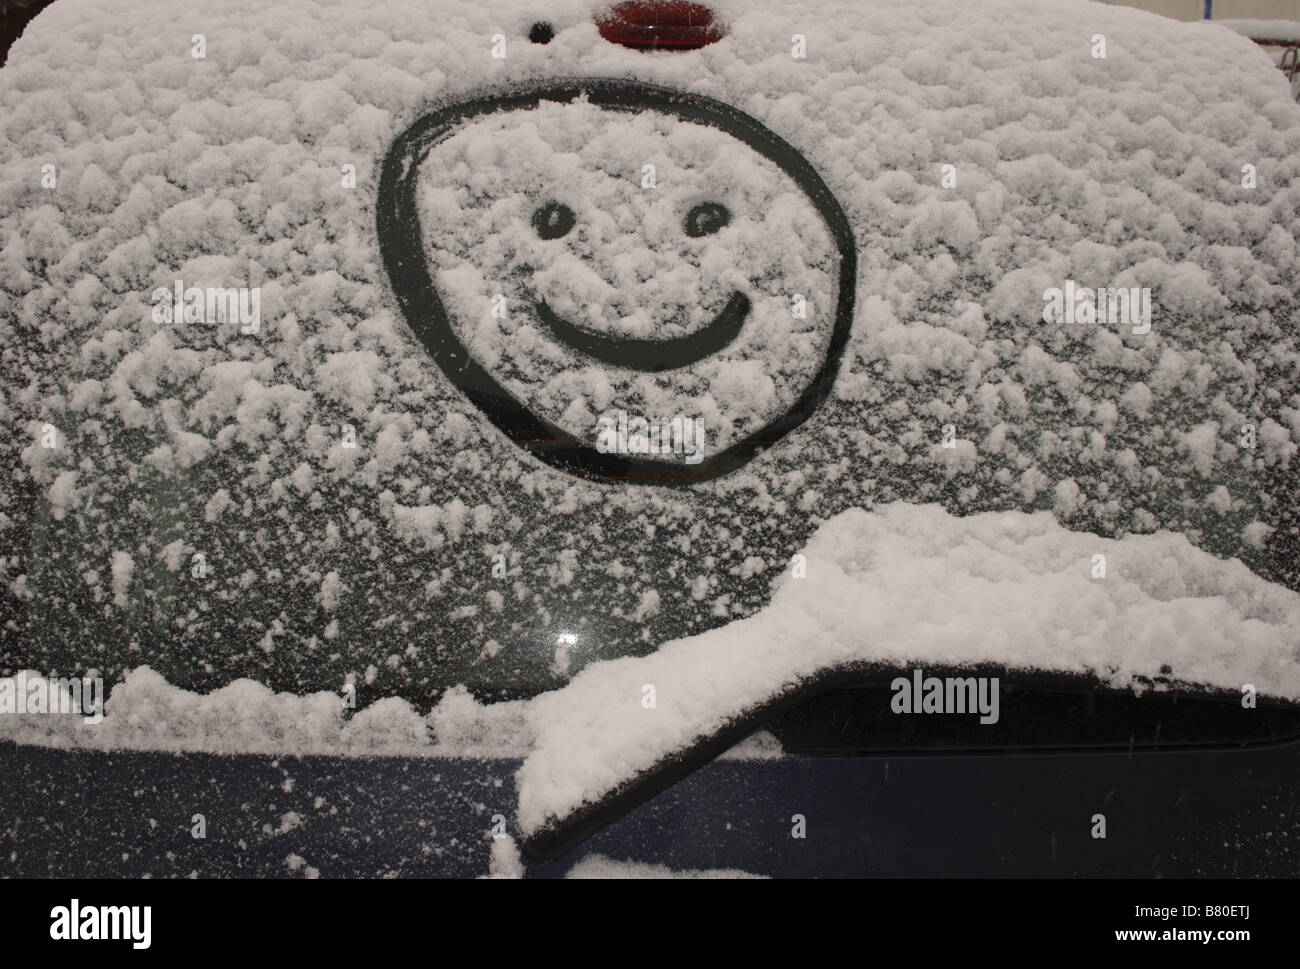 Smiley face drawn in fresh snow on rear windscreen of a car. Photo by Willy Matheisl Stock Photo